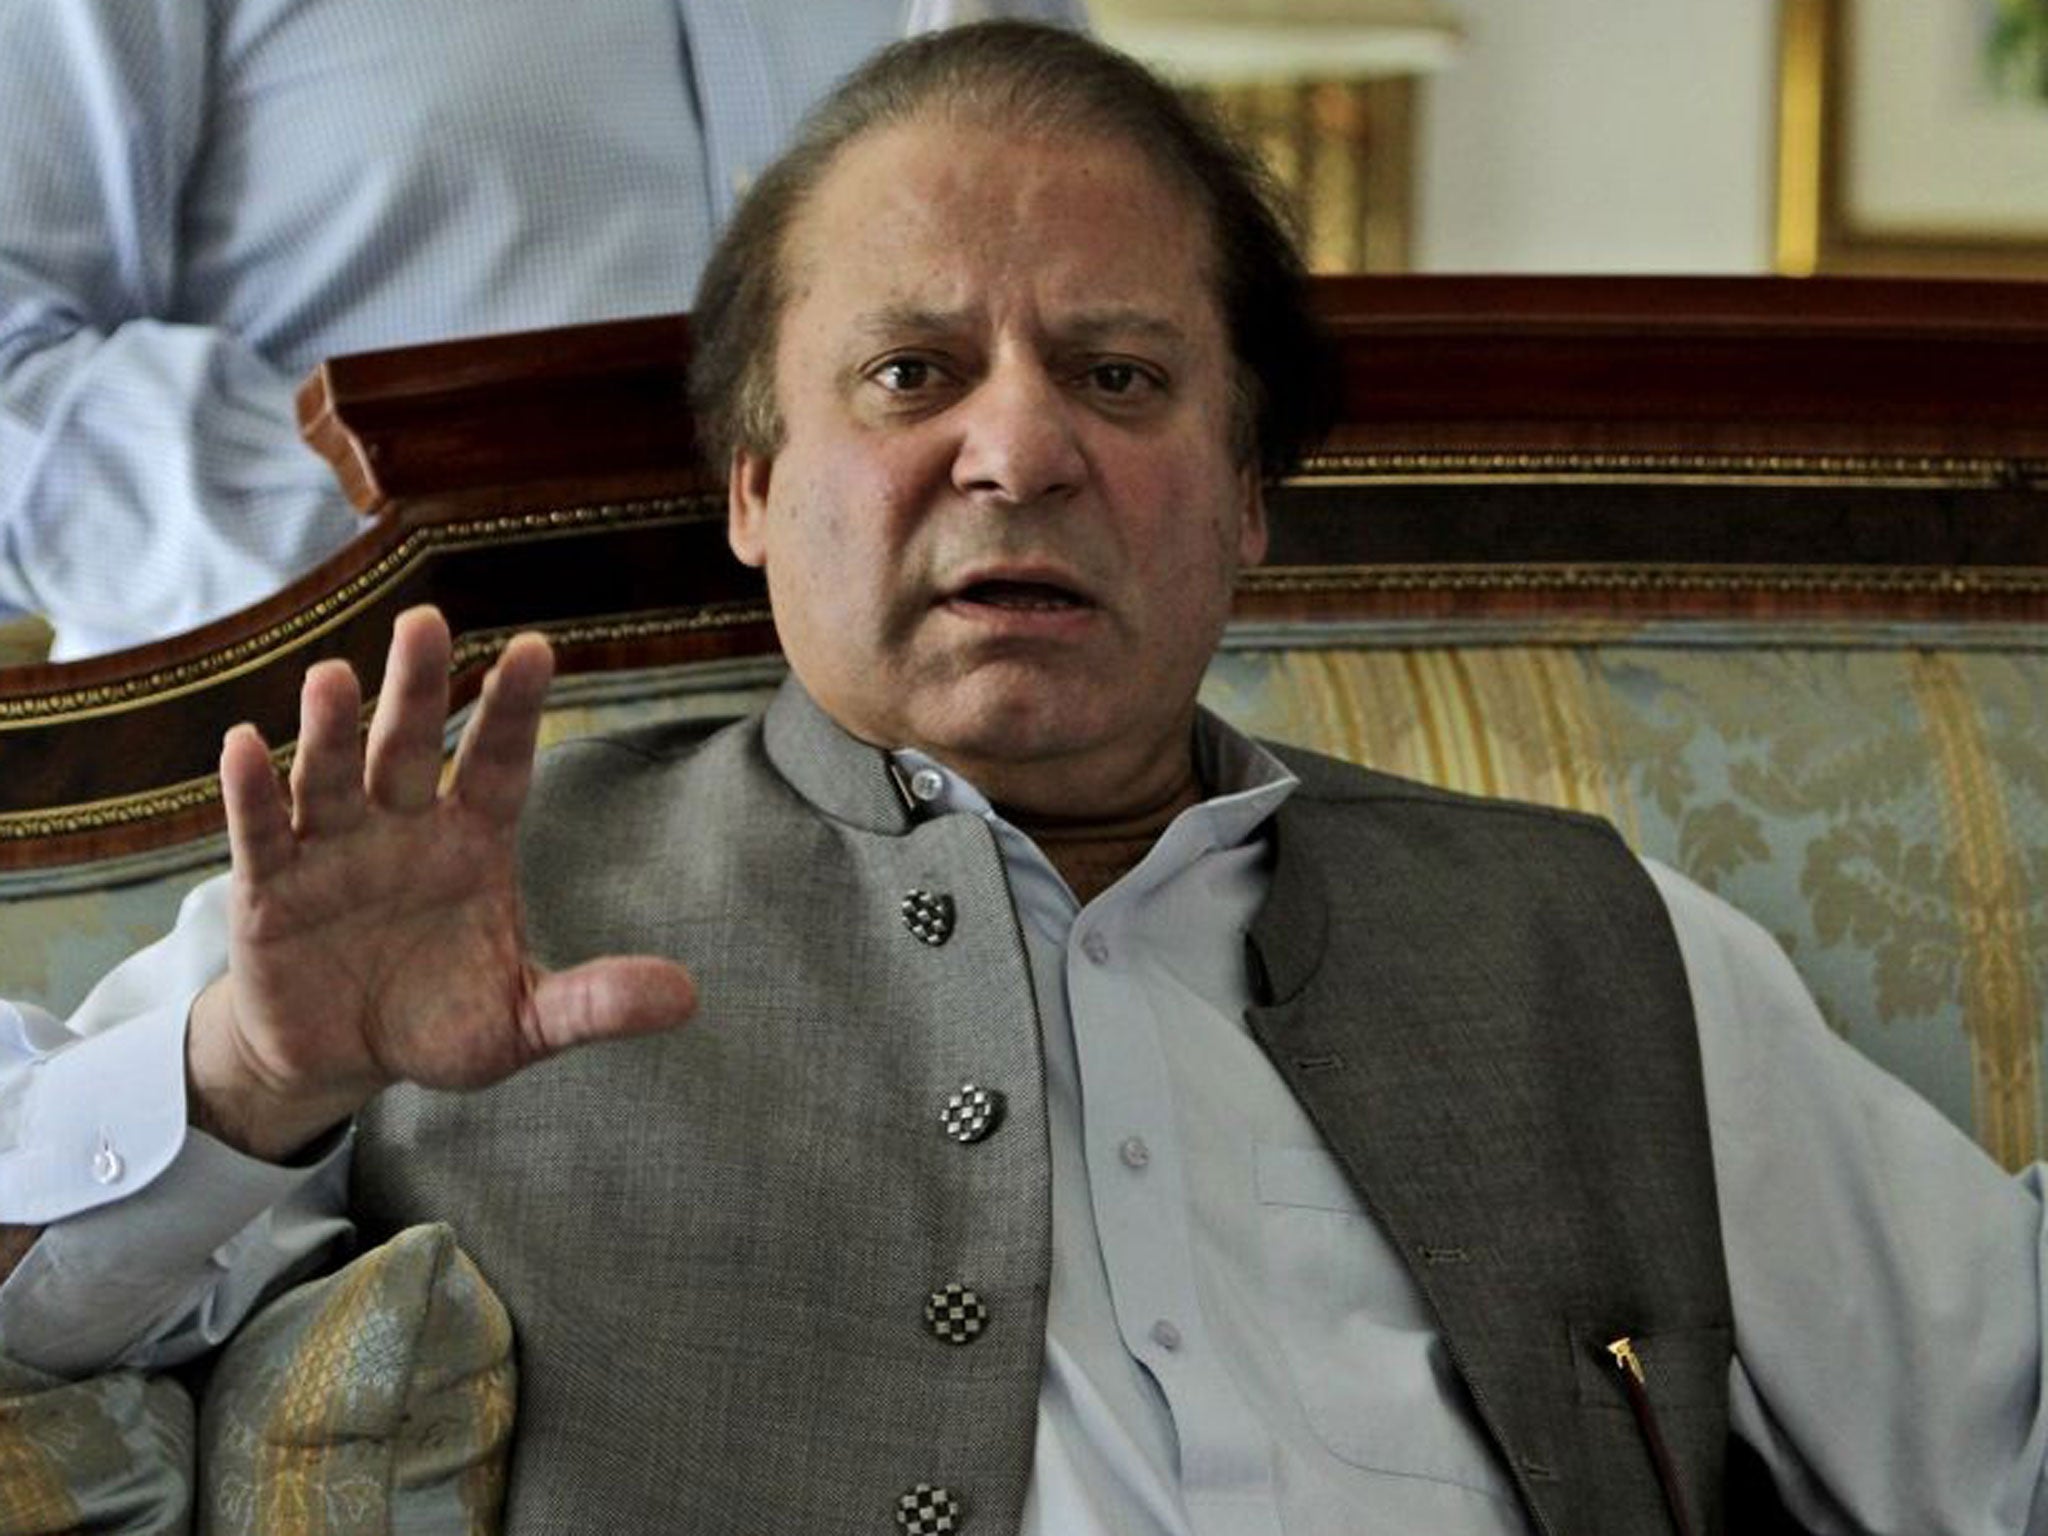 Nawaz Sharif faces challenges over electricity, building the economy, and tackling militancy